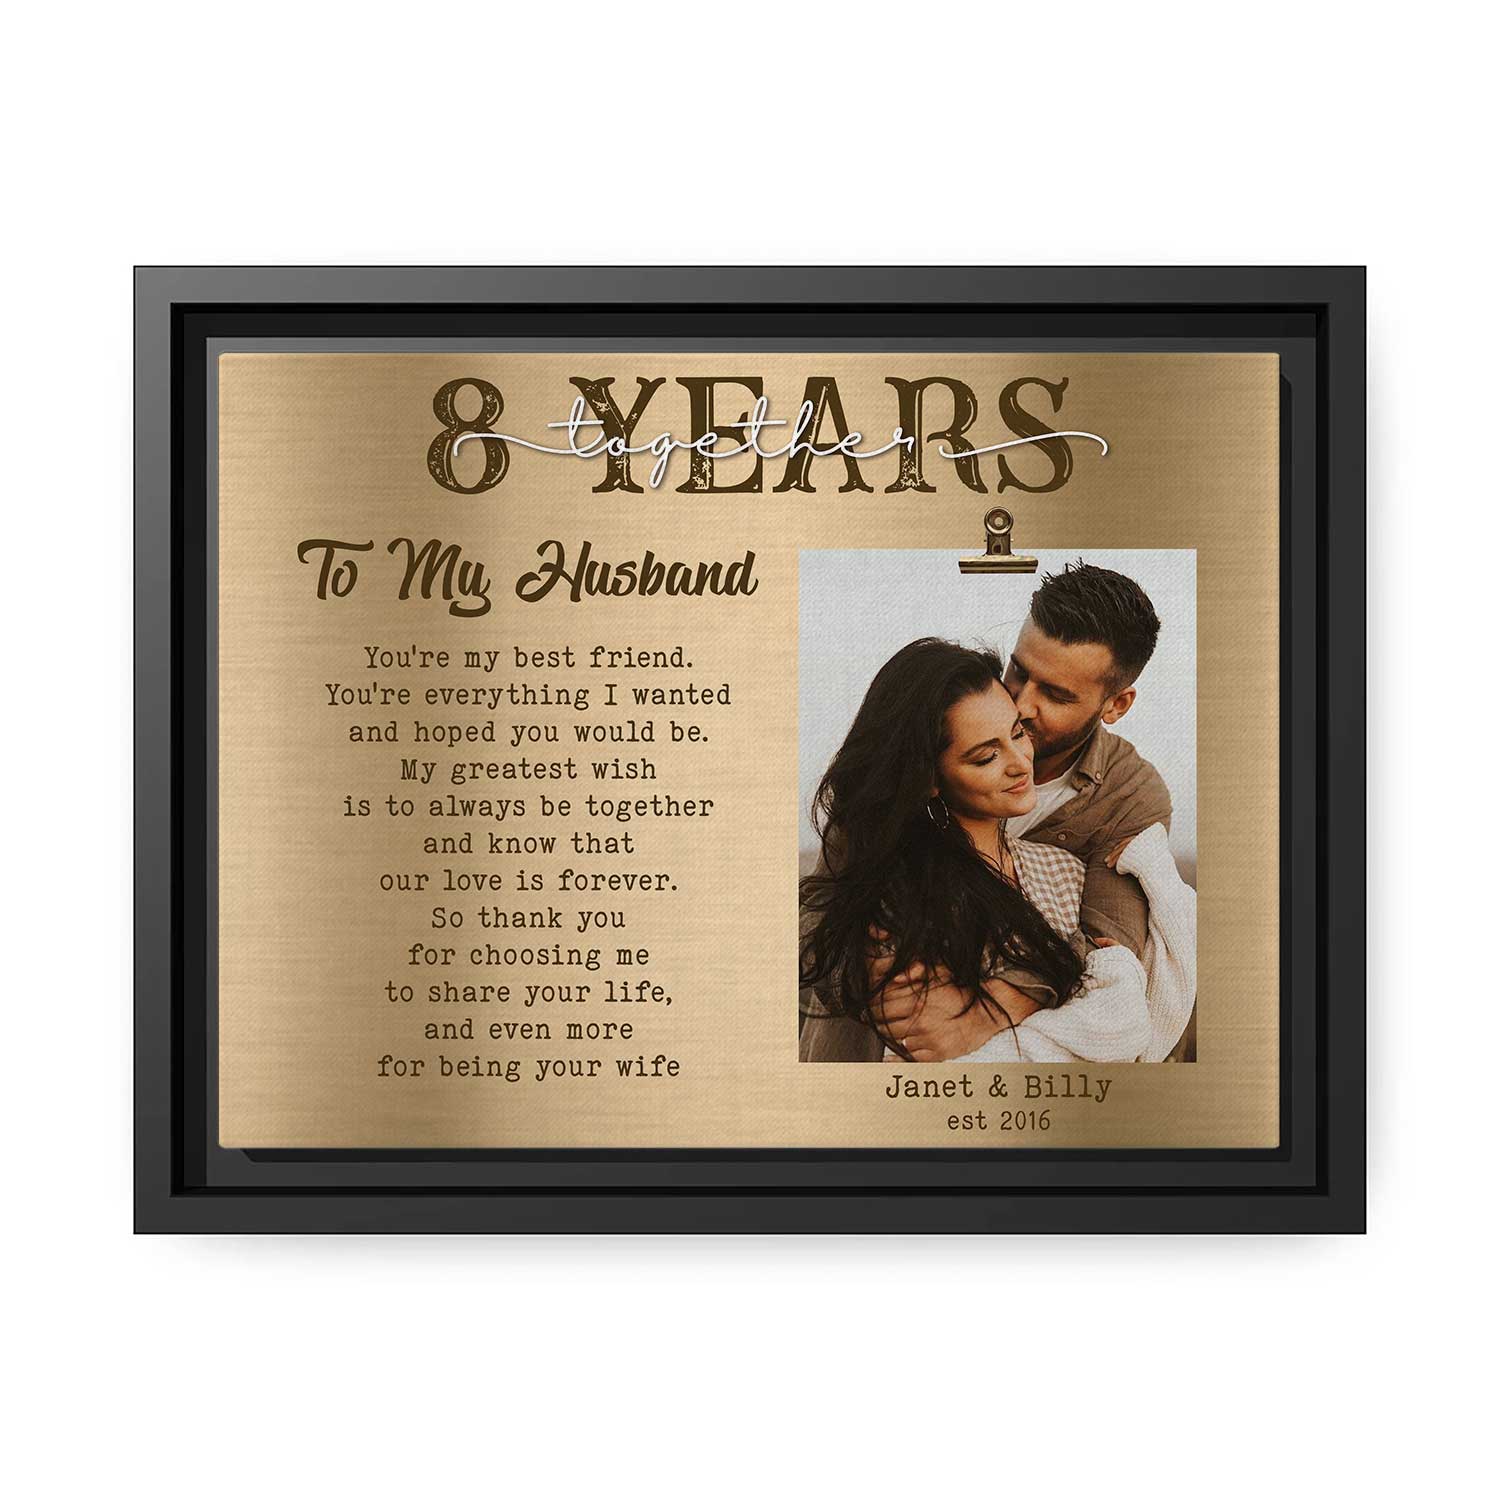 8 Years - Personalized 8 Year Anniversary gift For Husband or Wife - Custom Canvas Print - MyMindfulGifts